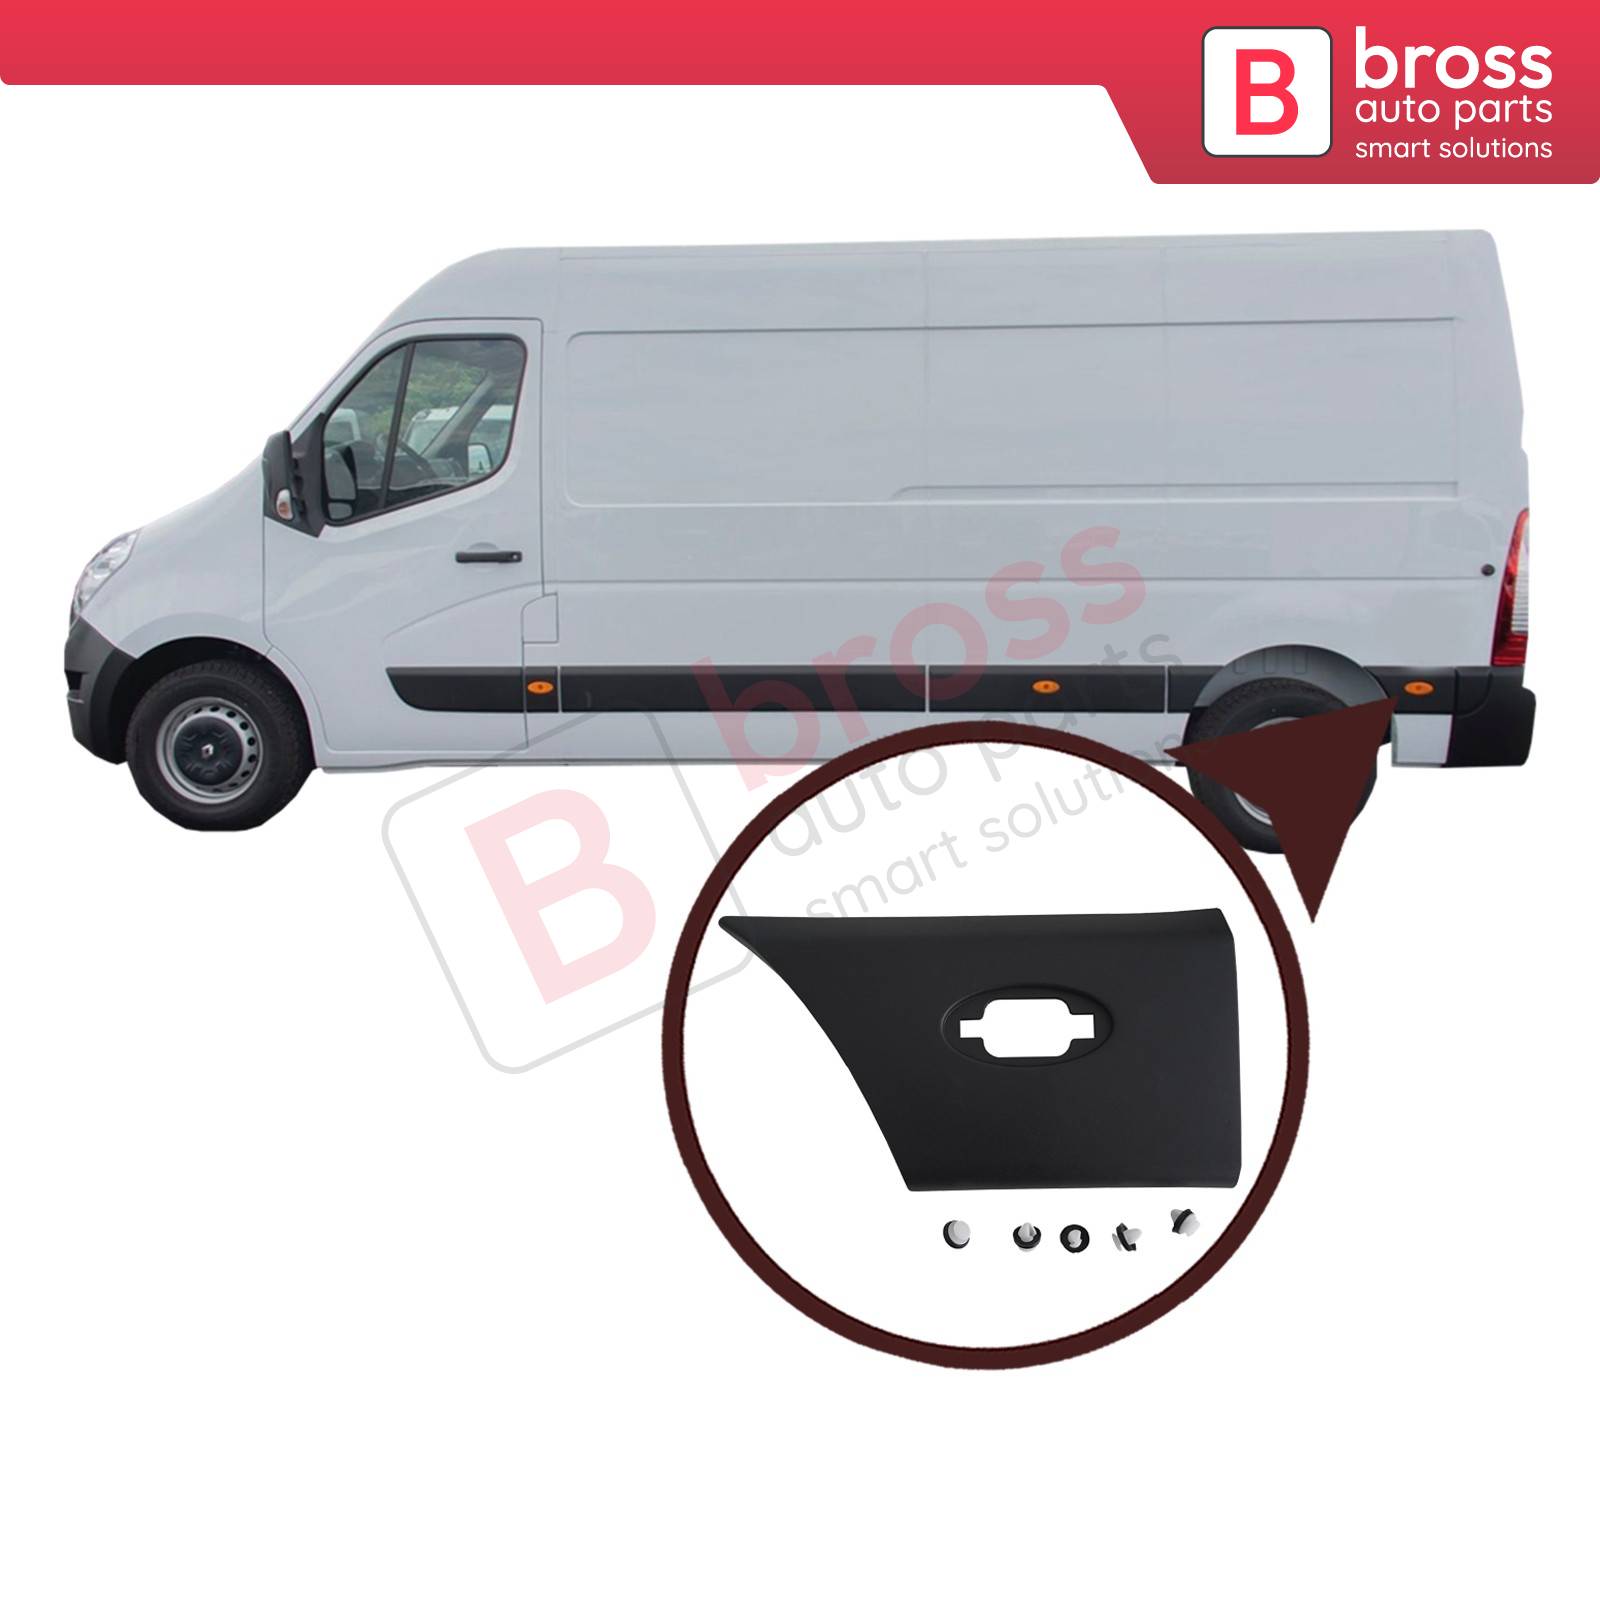 Bross Auto Parts - BSP958 Rear Left Side Panel Moulding Rub Strip  768F20007R for Renault Master MK3 Movano B NV400